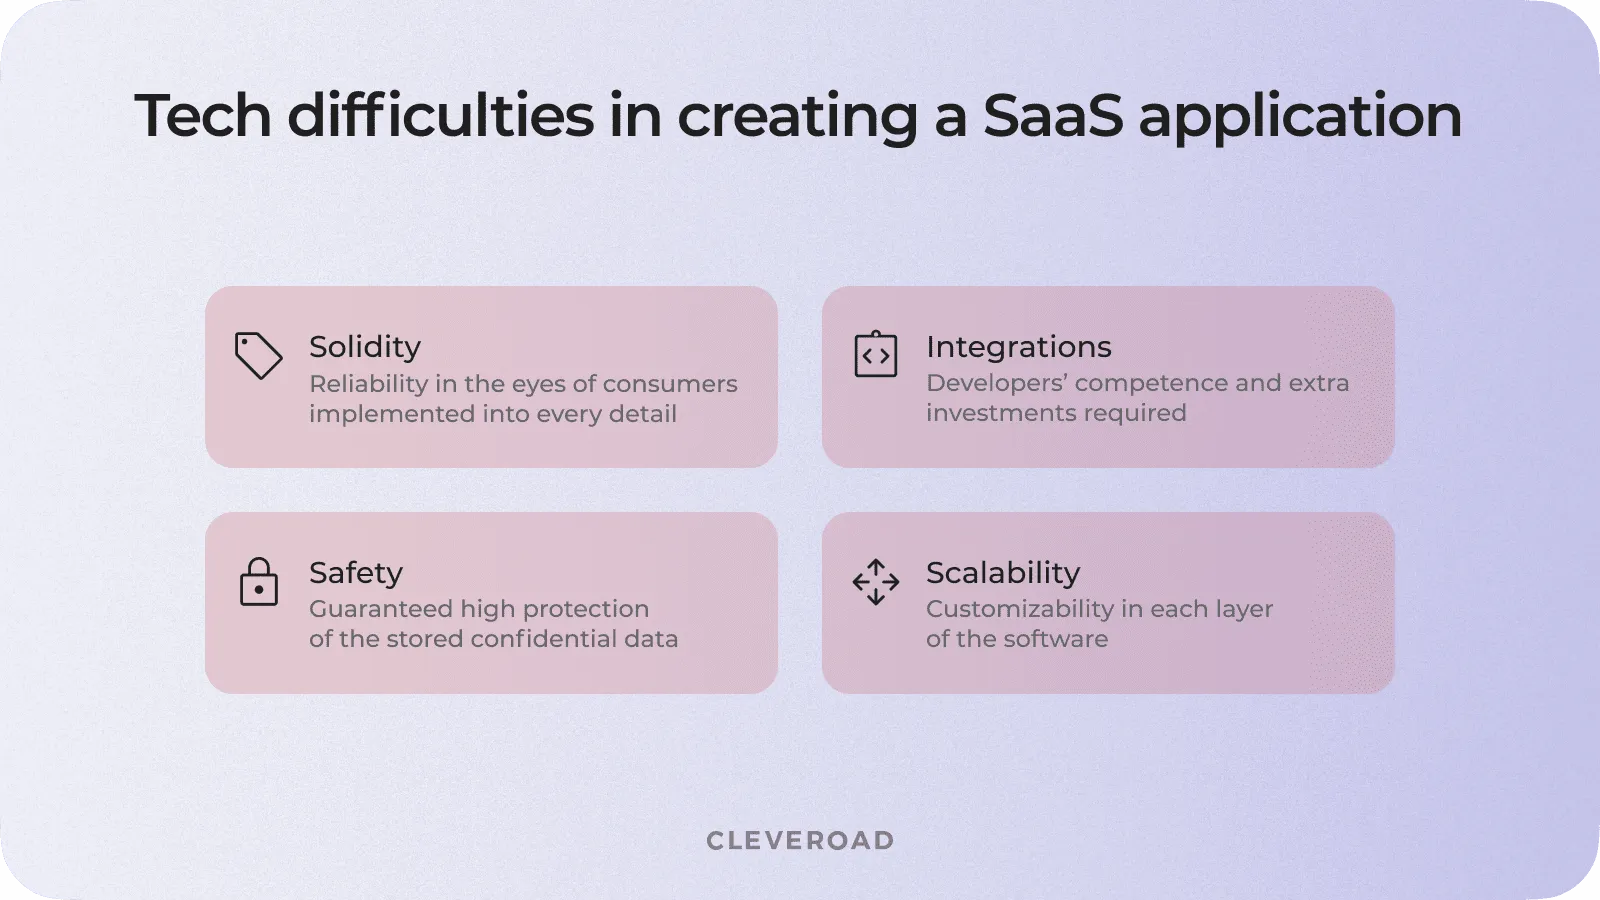 Tech Difficulties in SaaS Creation